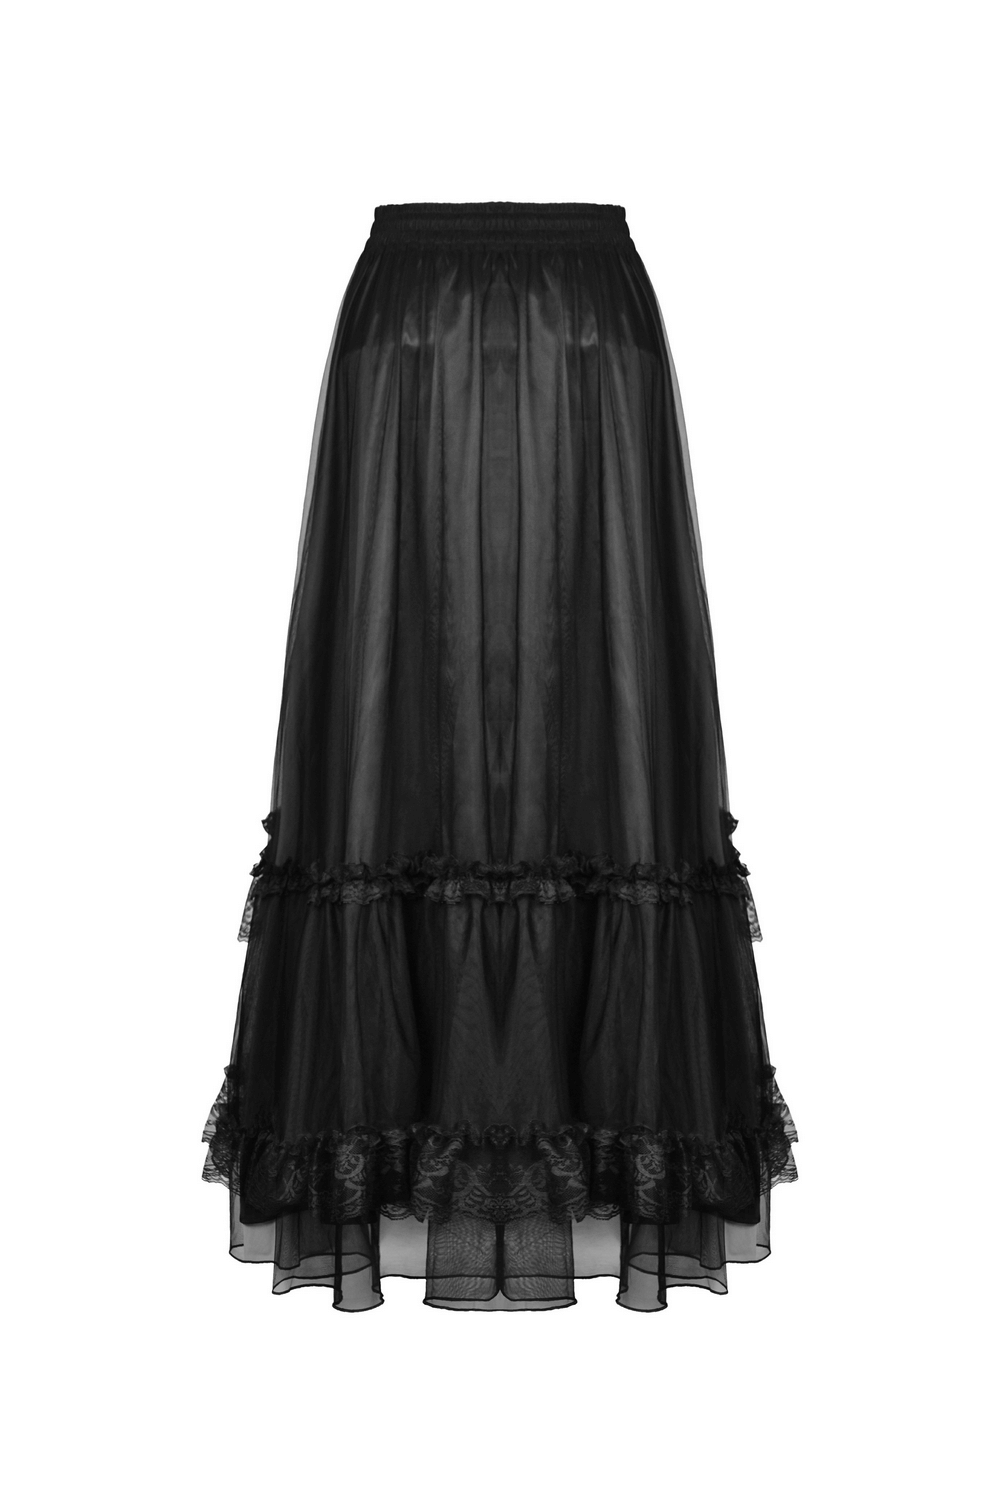 Black Gothic Chiffon High-Low Skirt with Lace Accents